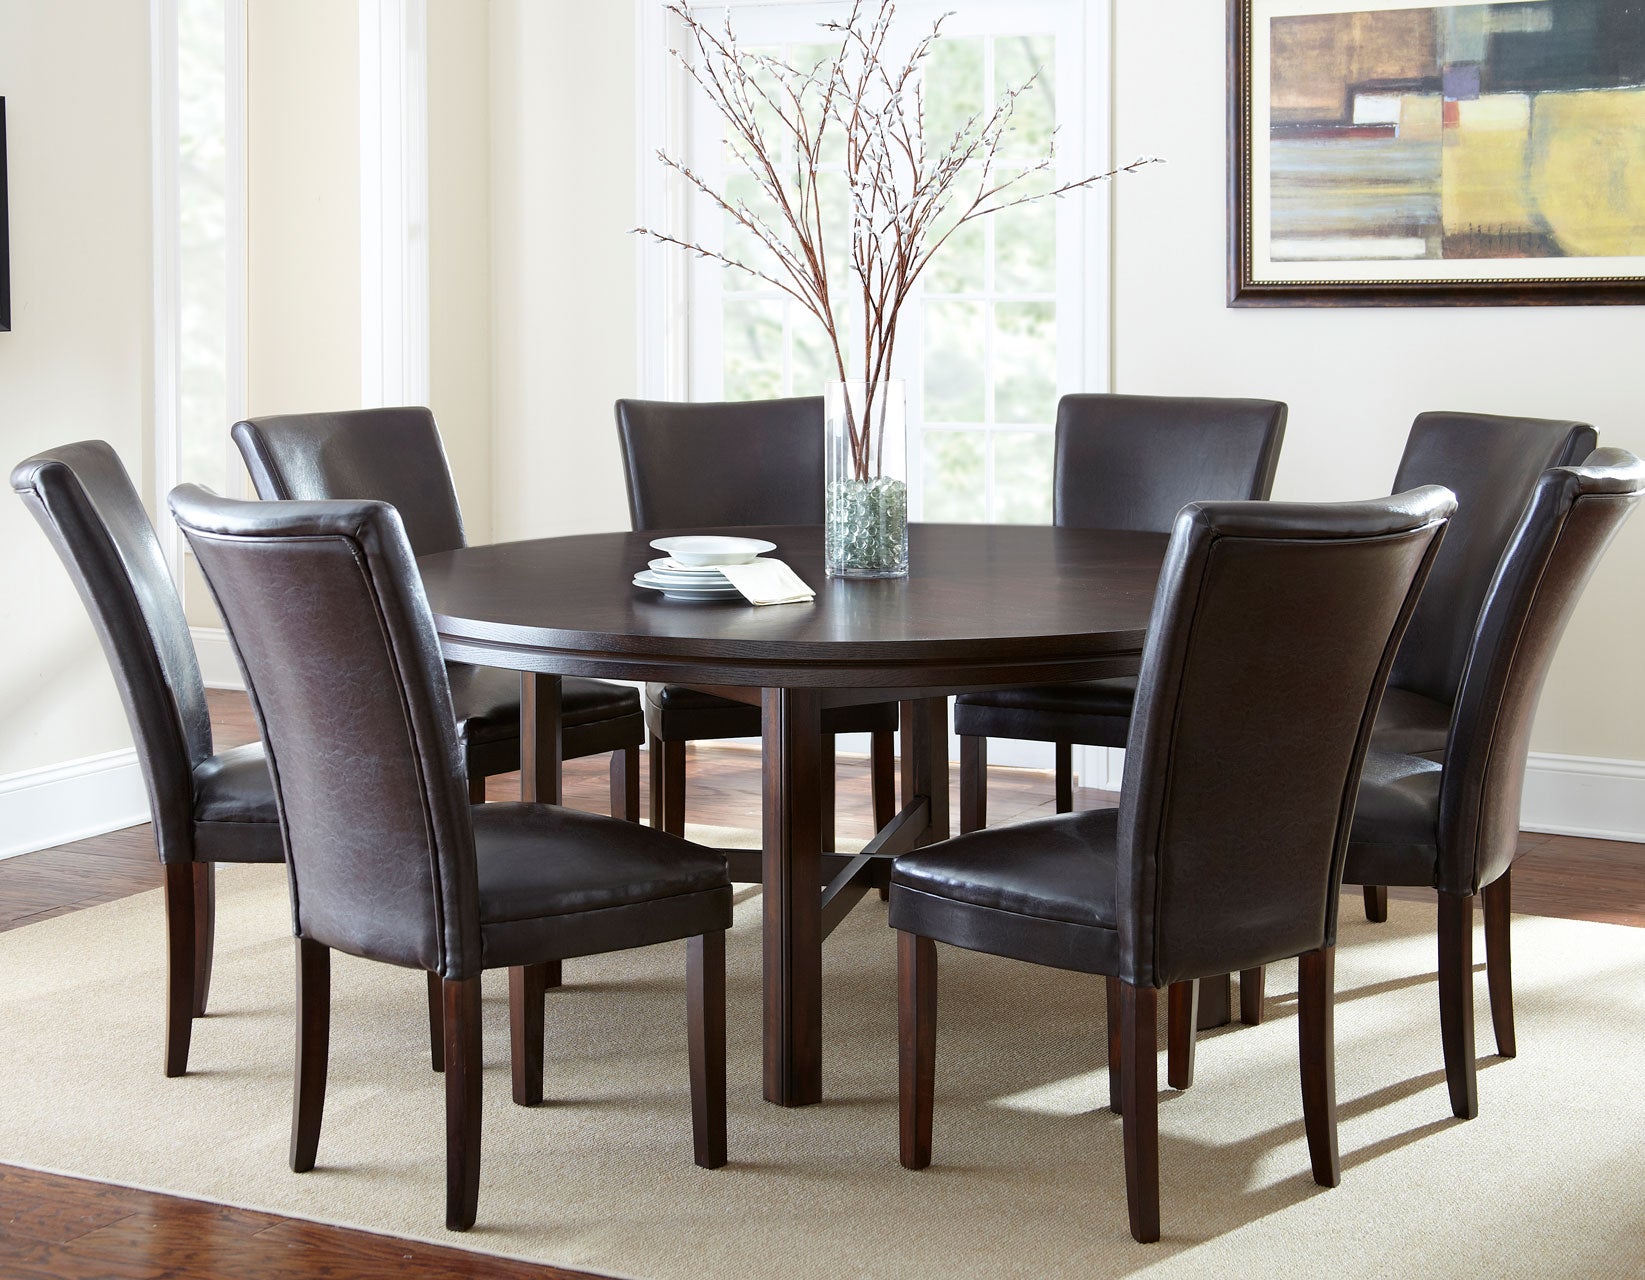 72 Inch Round Dining Room Table : 72 Inch Round Mahogany Dining Room Table - They are set out below.